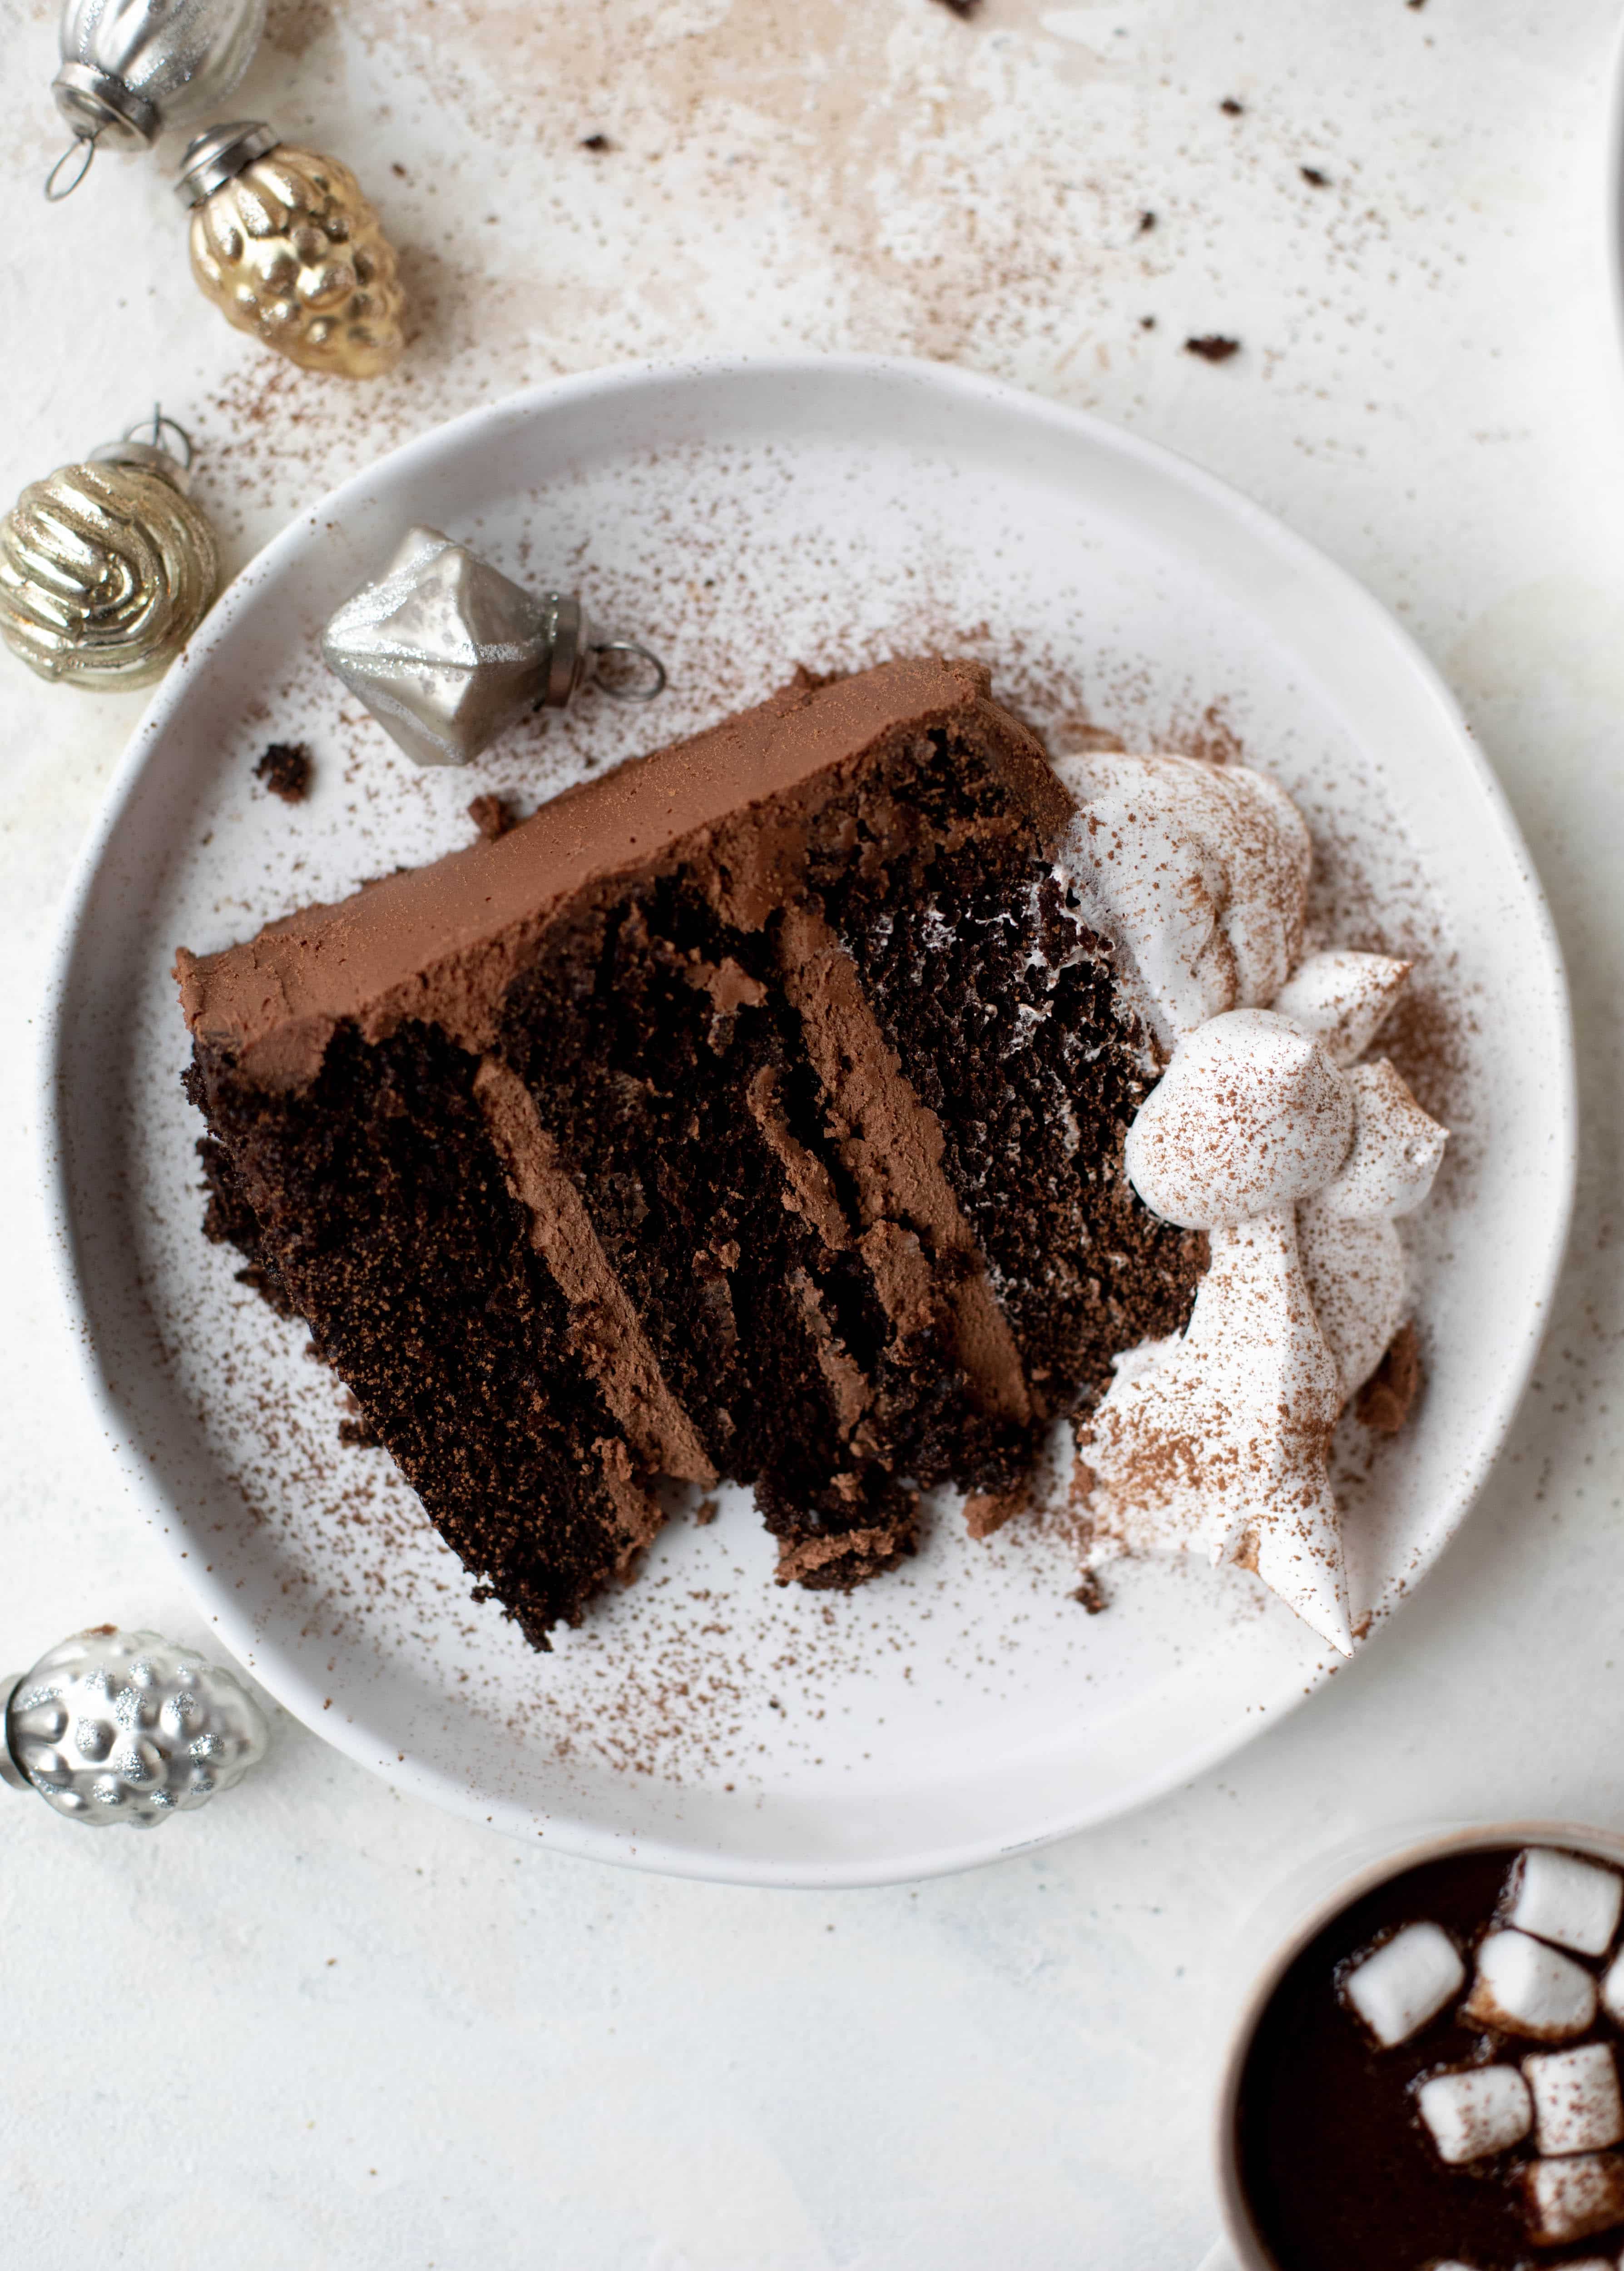 This hot cocoa cake is made with the fudgiest chocolate cake, smothered in chocolate cream cheese frosting and dolloped with whipped marshmallow!